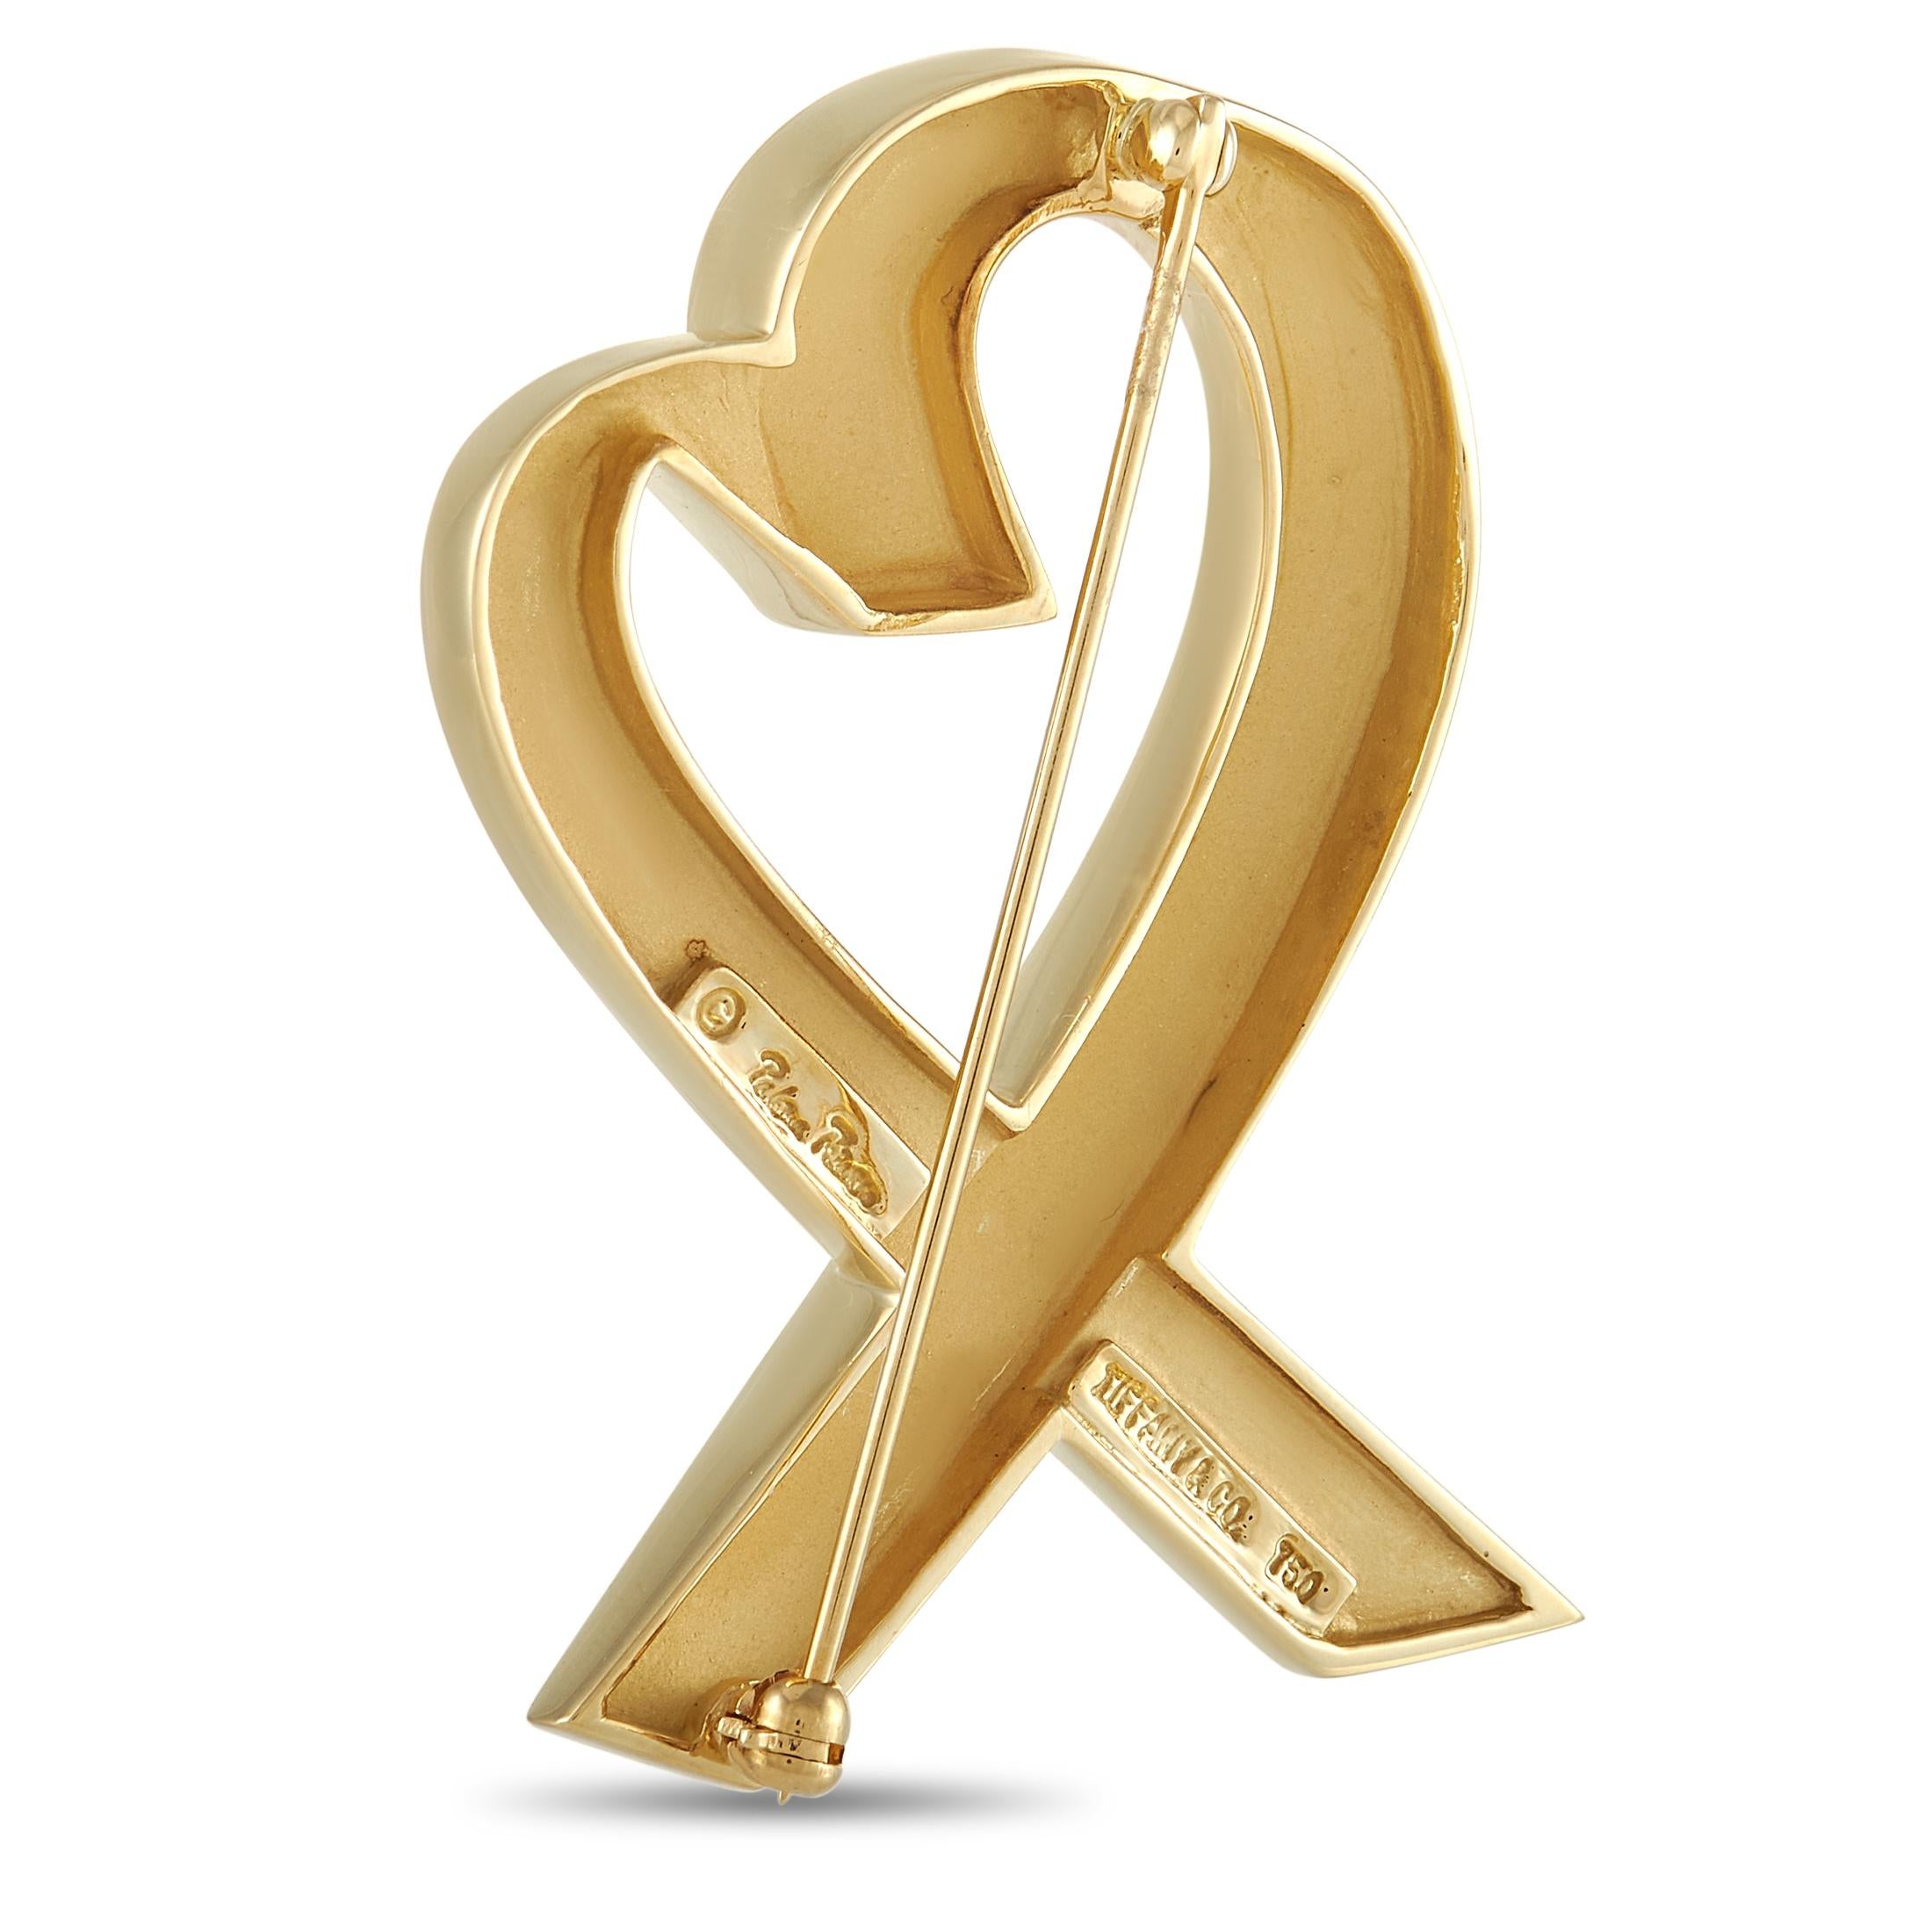 Undeniably charming, this luxurious brooch from Tiffany & Co. is an exquisite addition to any ensemble. Pin closure at the back makes this 18K Yellow Gold heart-shaped design incredibly versatile. This lustrous accessory measures 1.75” long and